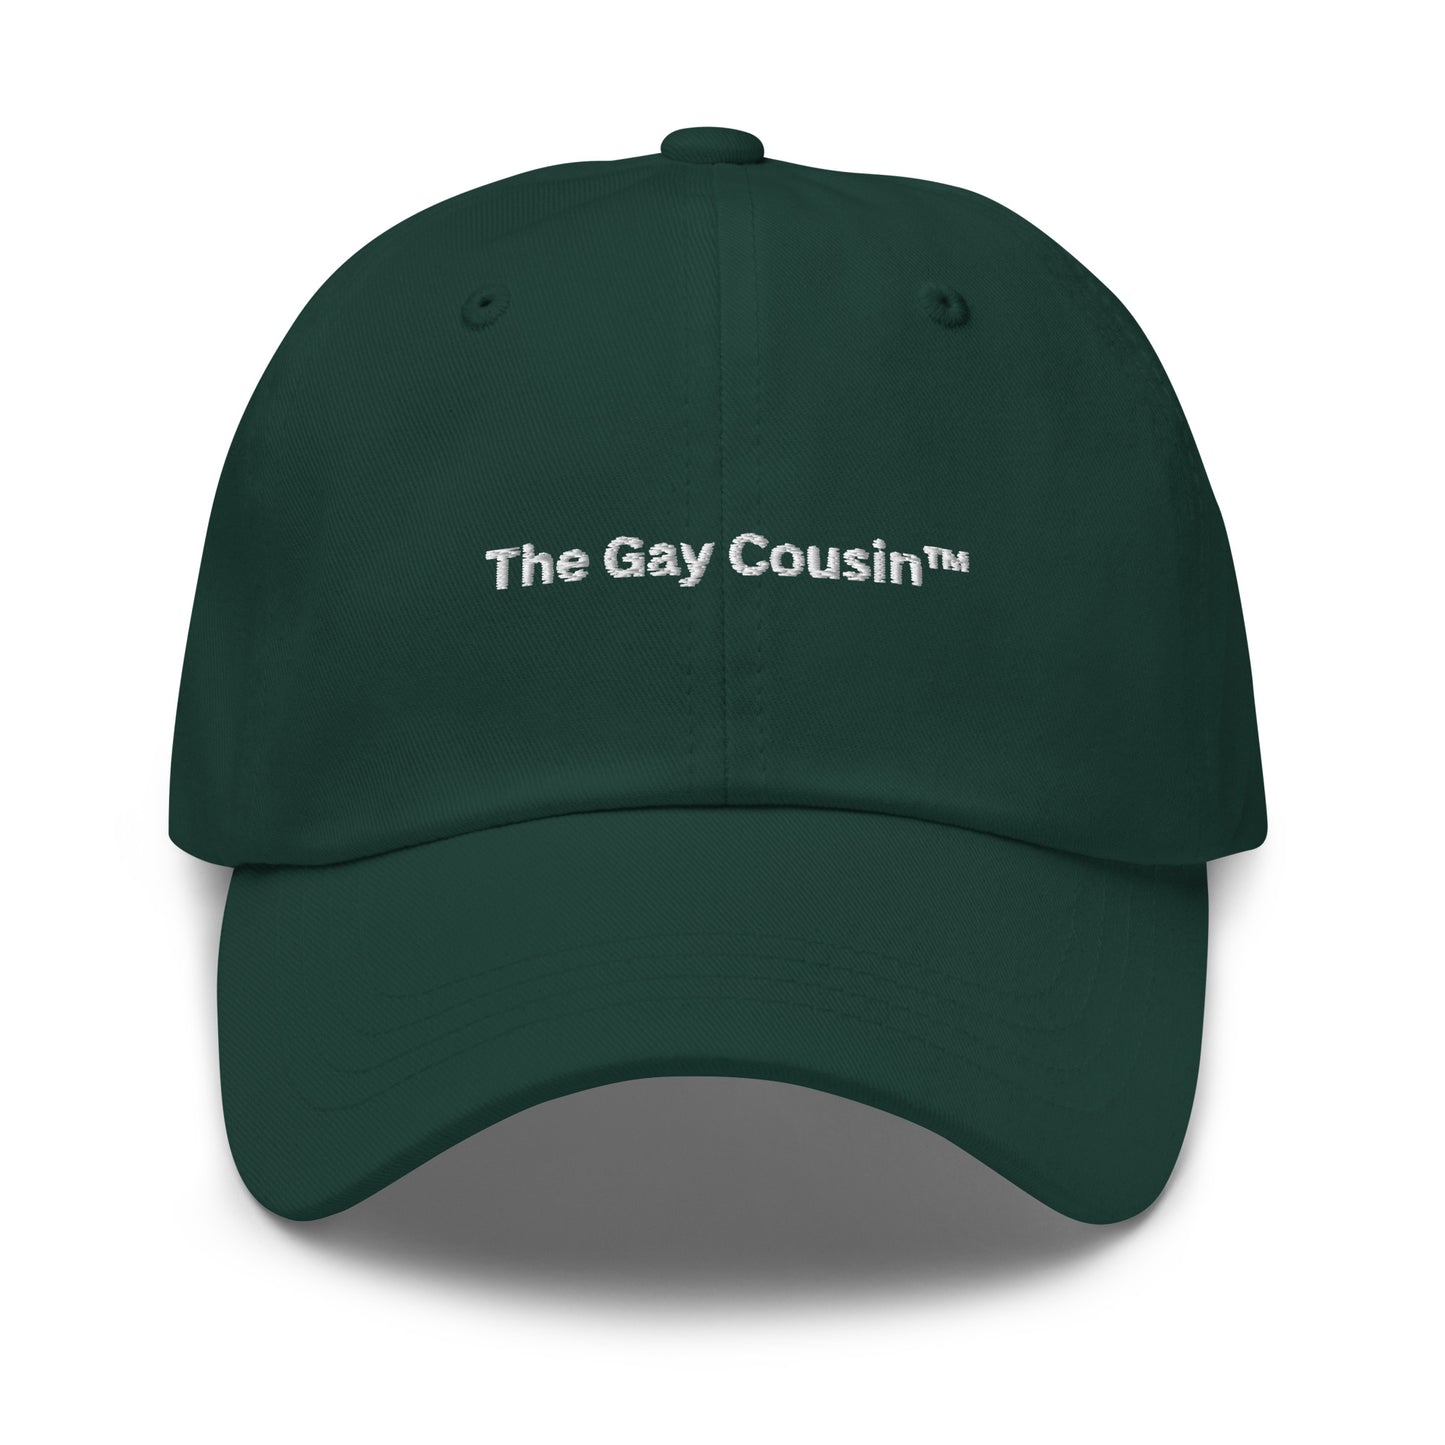 The Gay Cousin (TM)